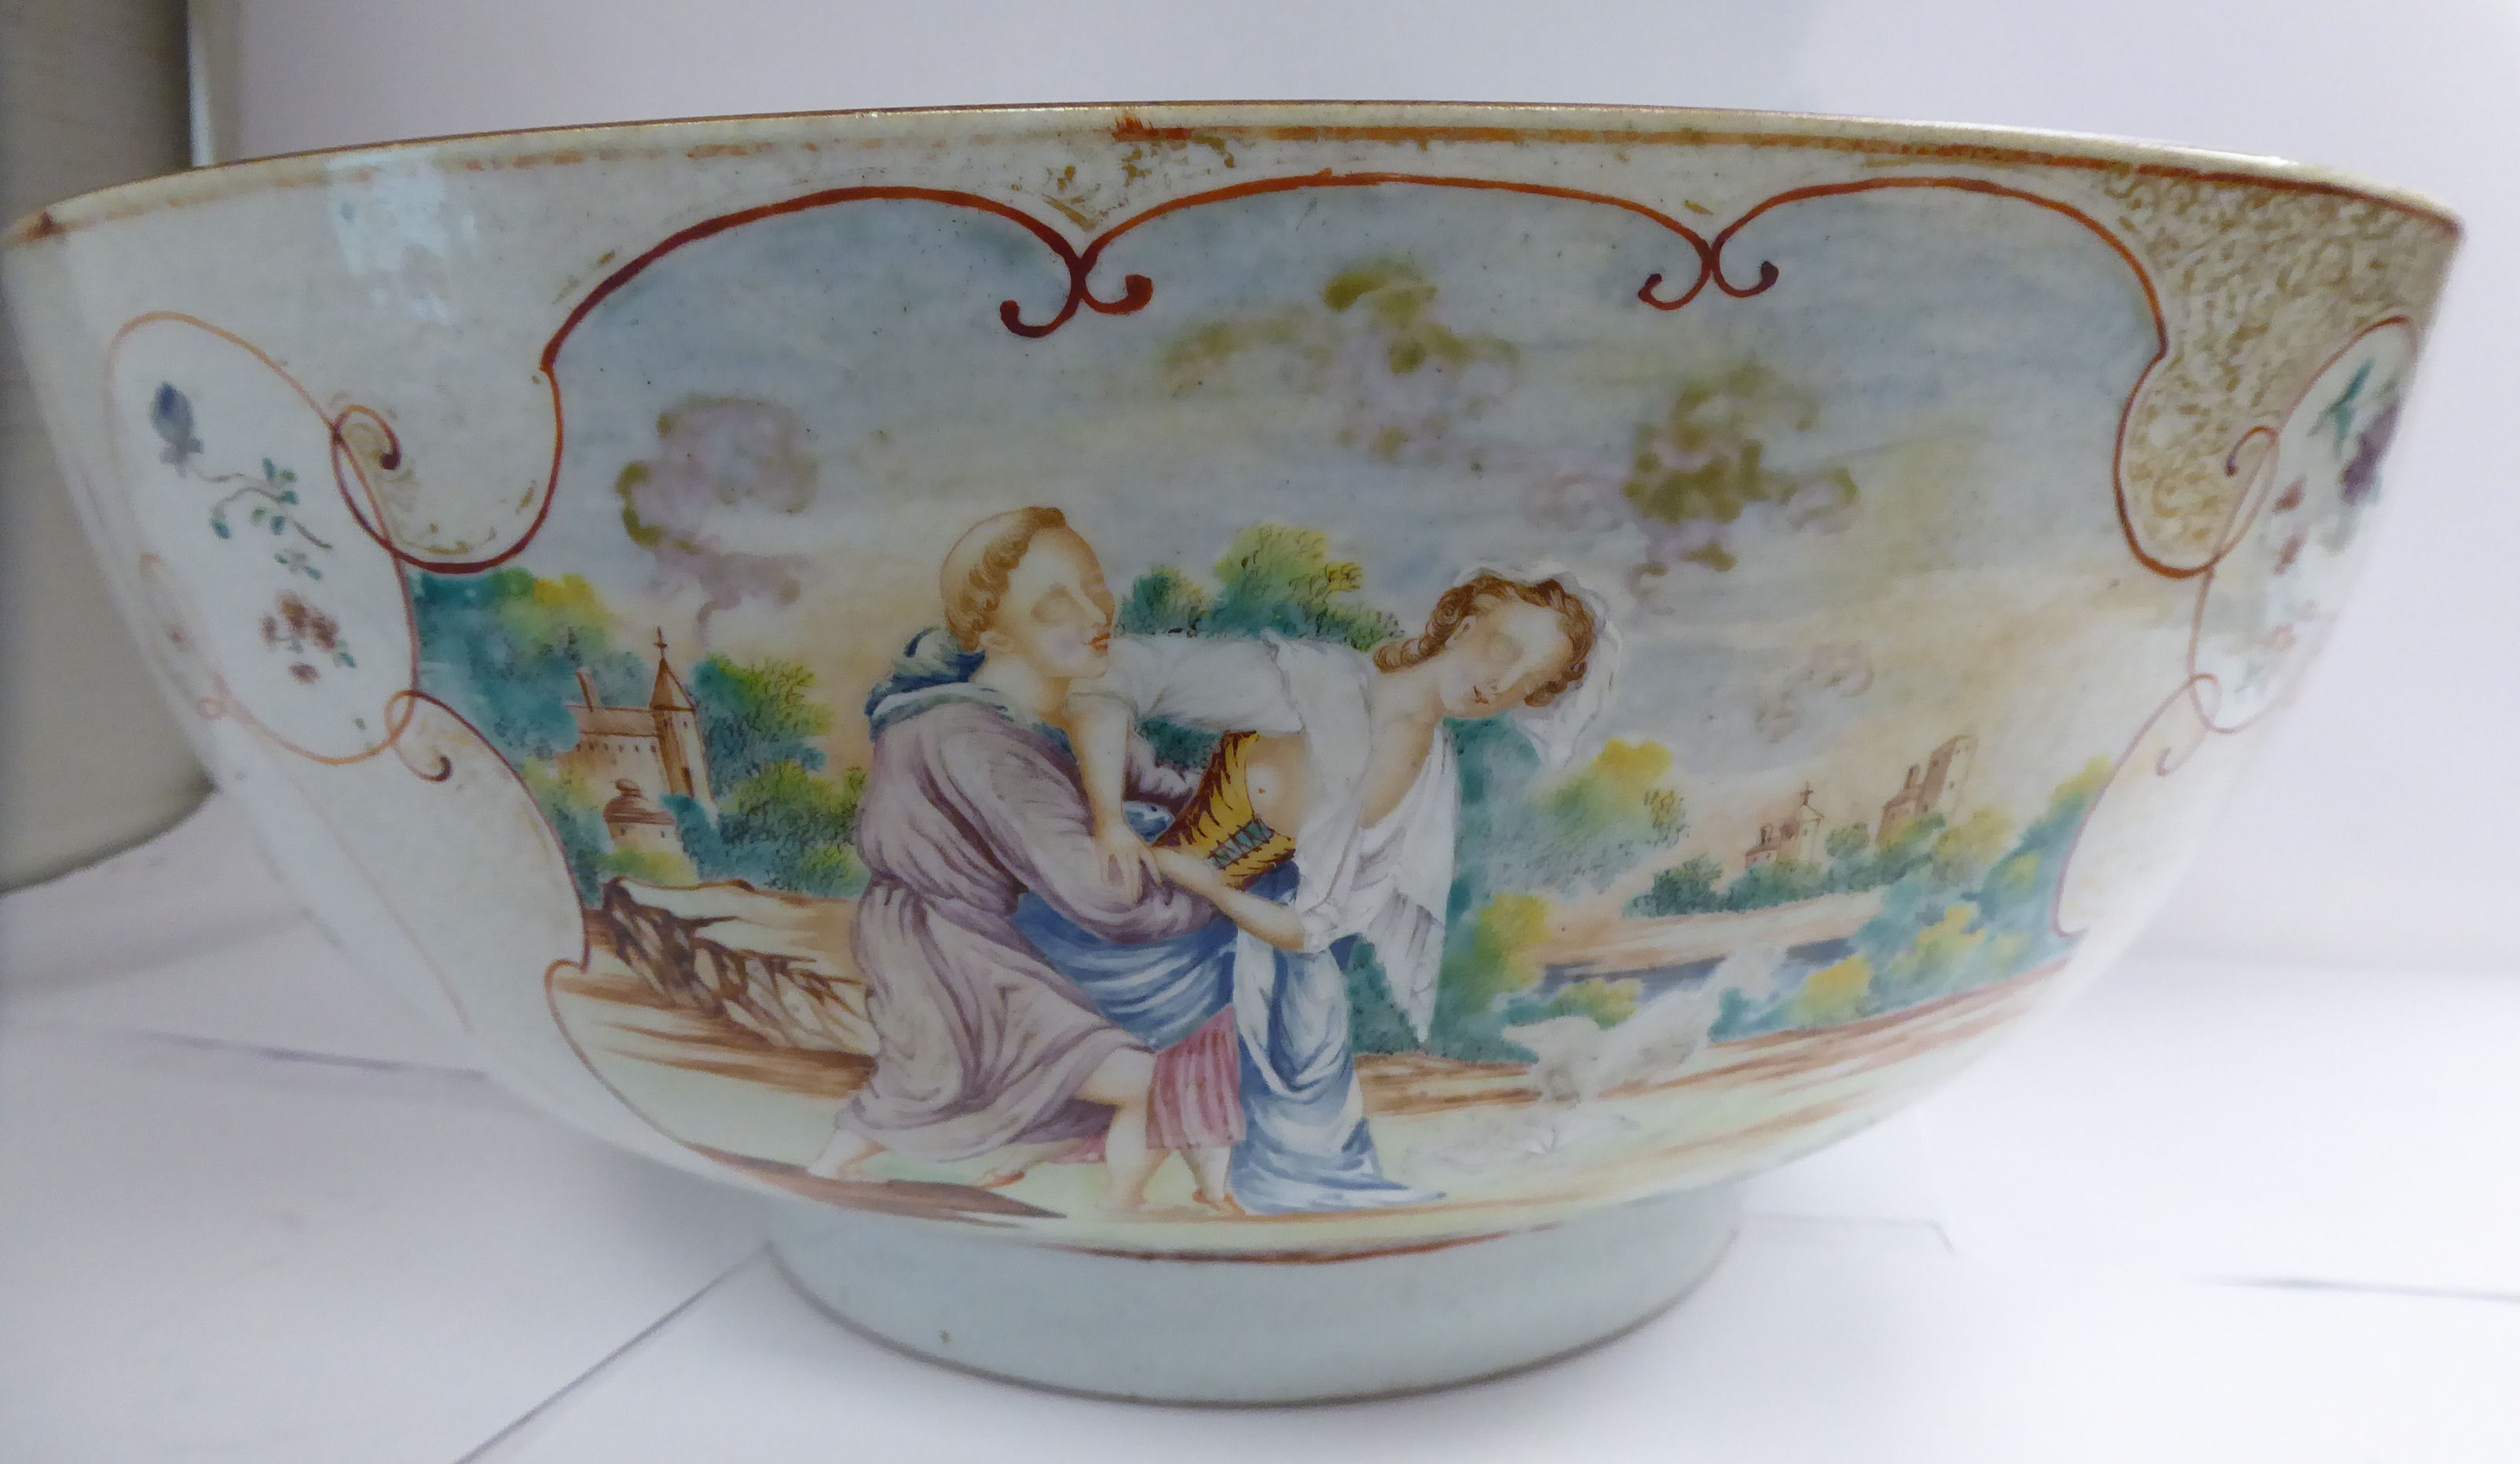 A late 18thC Chinese porcelain footed bowl, decorated in European taste in reserves with figures, - Image 4 of 11